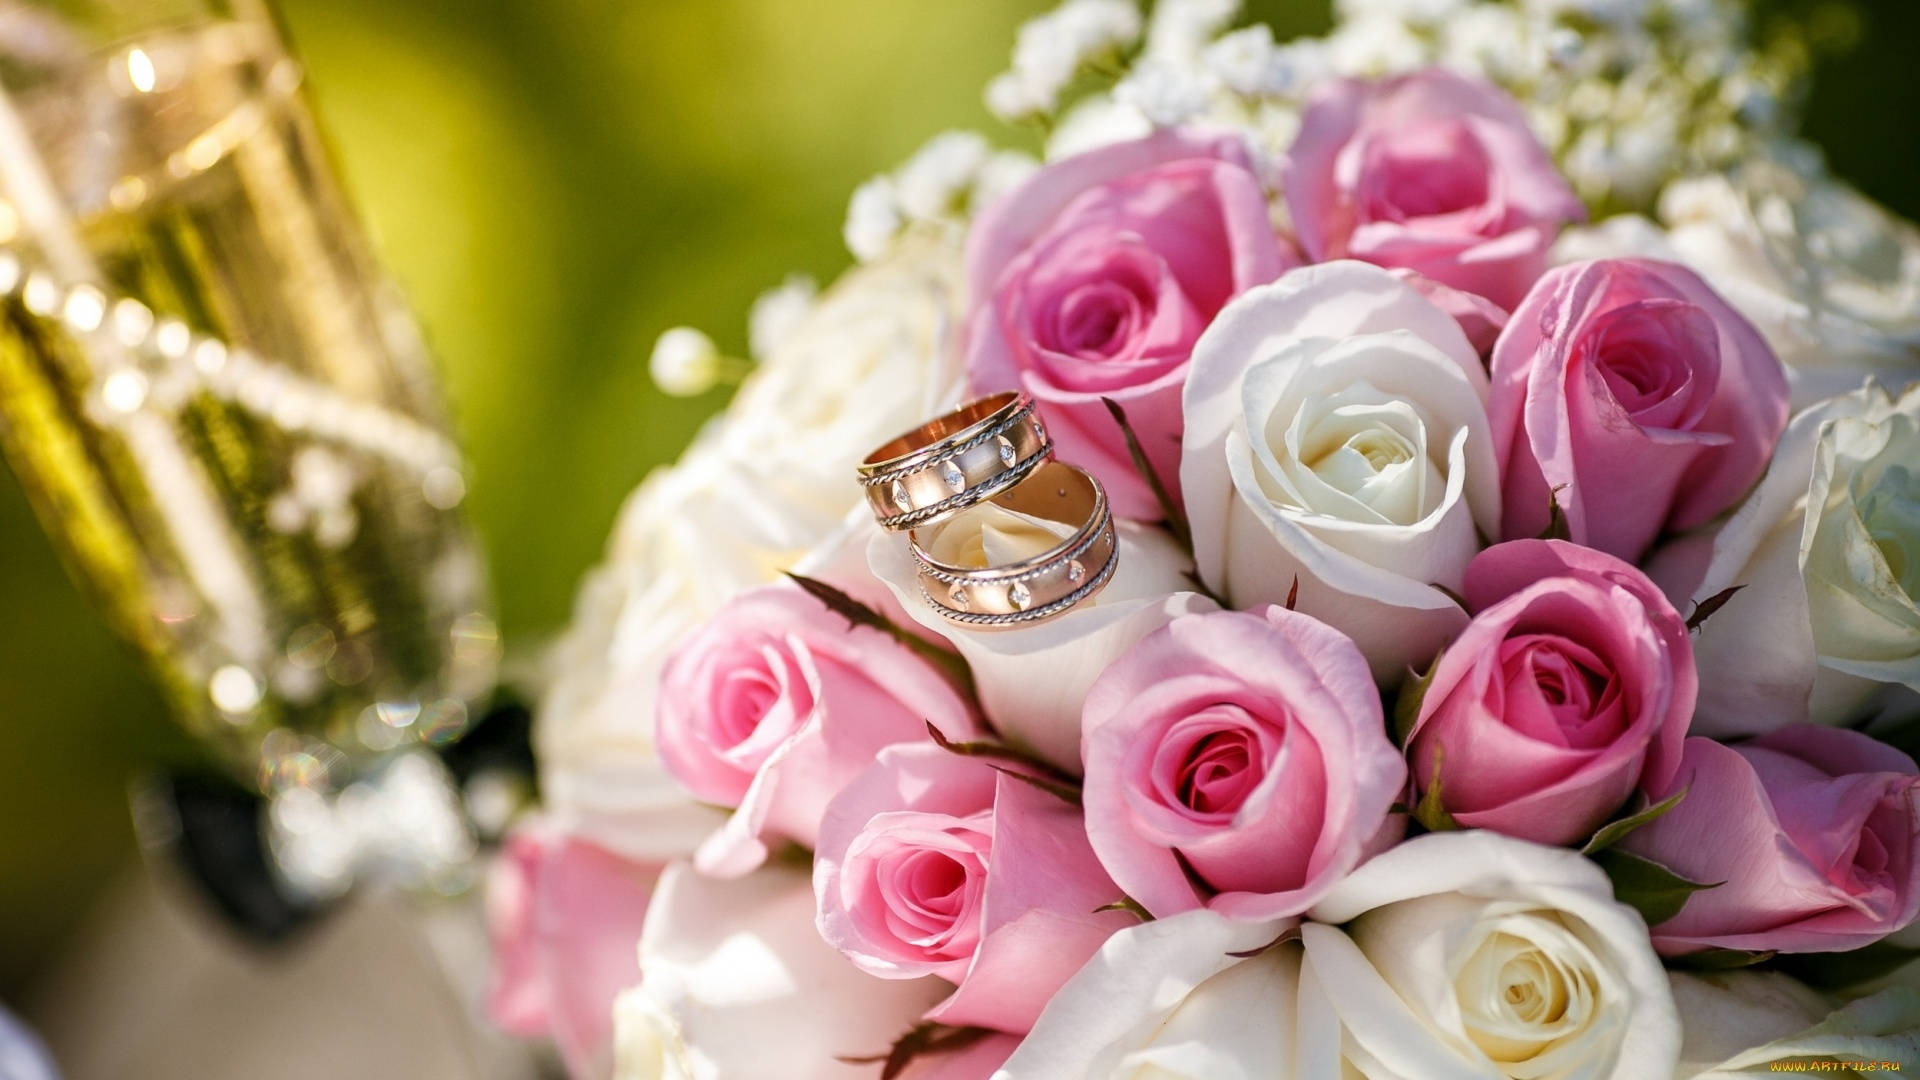 Romantic Wedding Rings On A Beautiful Bouquet